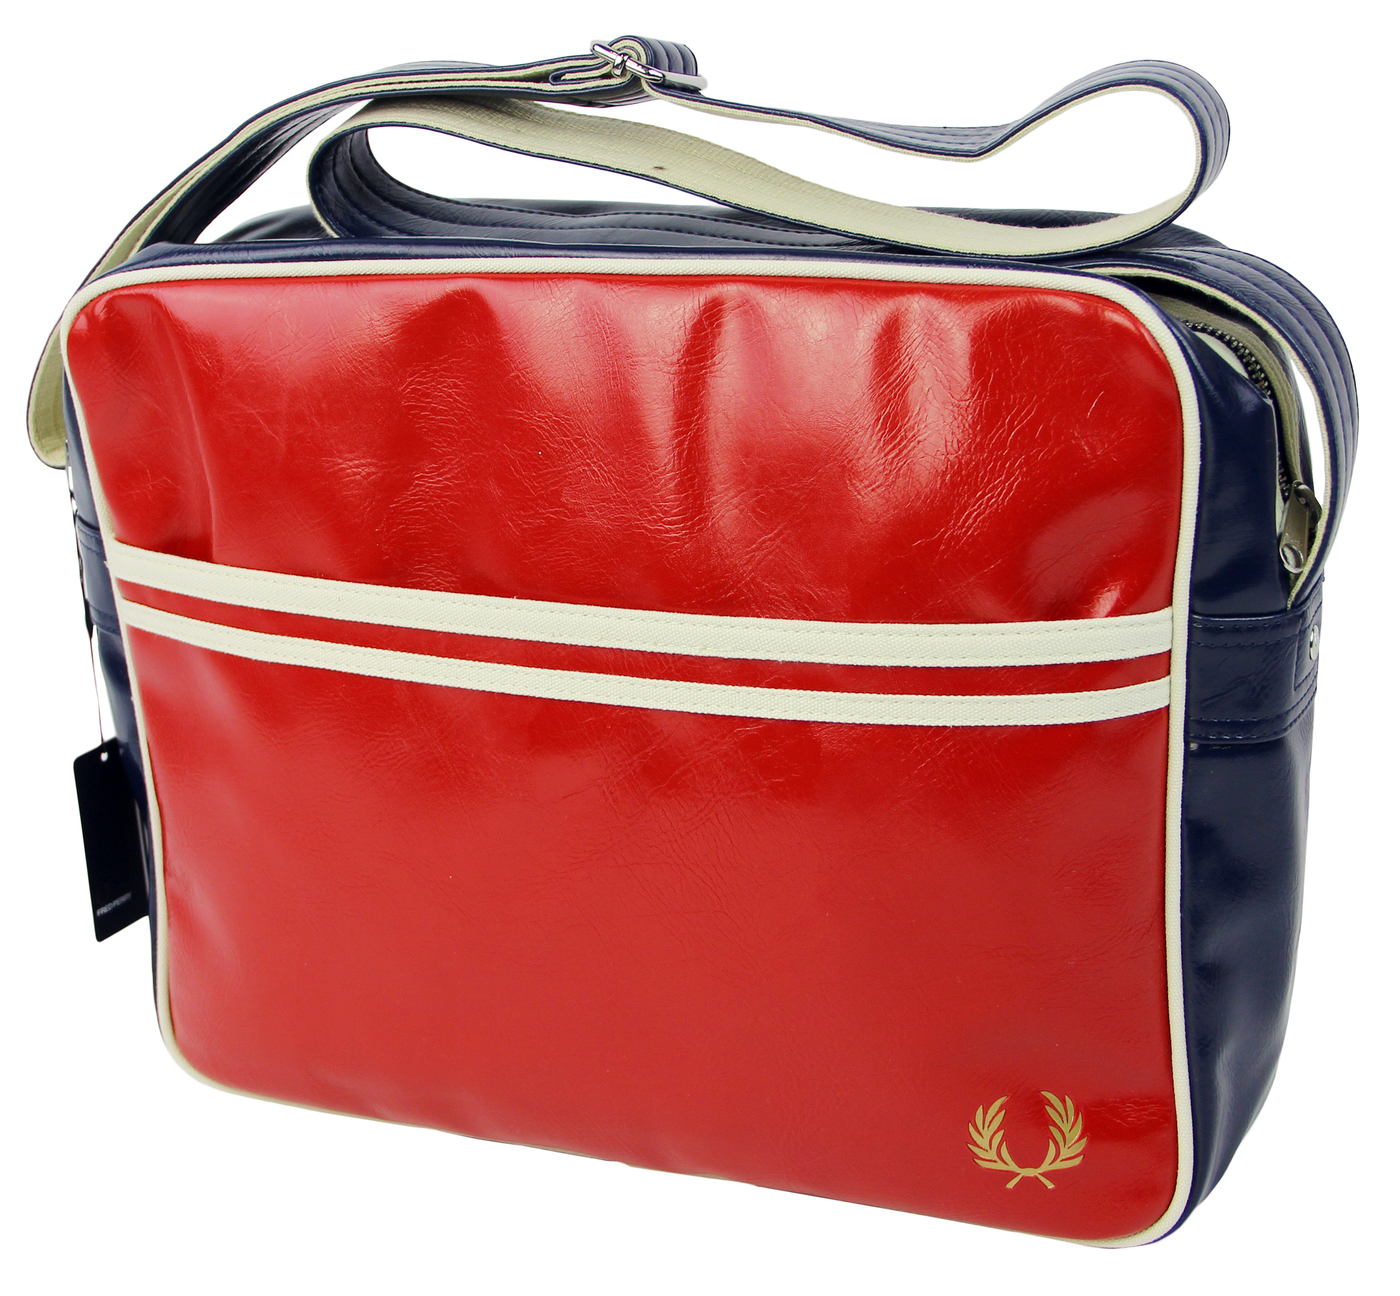 FRED PERRY Classic Retro Shoulder Bag - Red/Navy